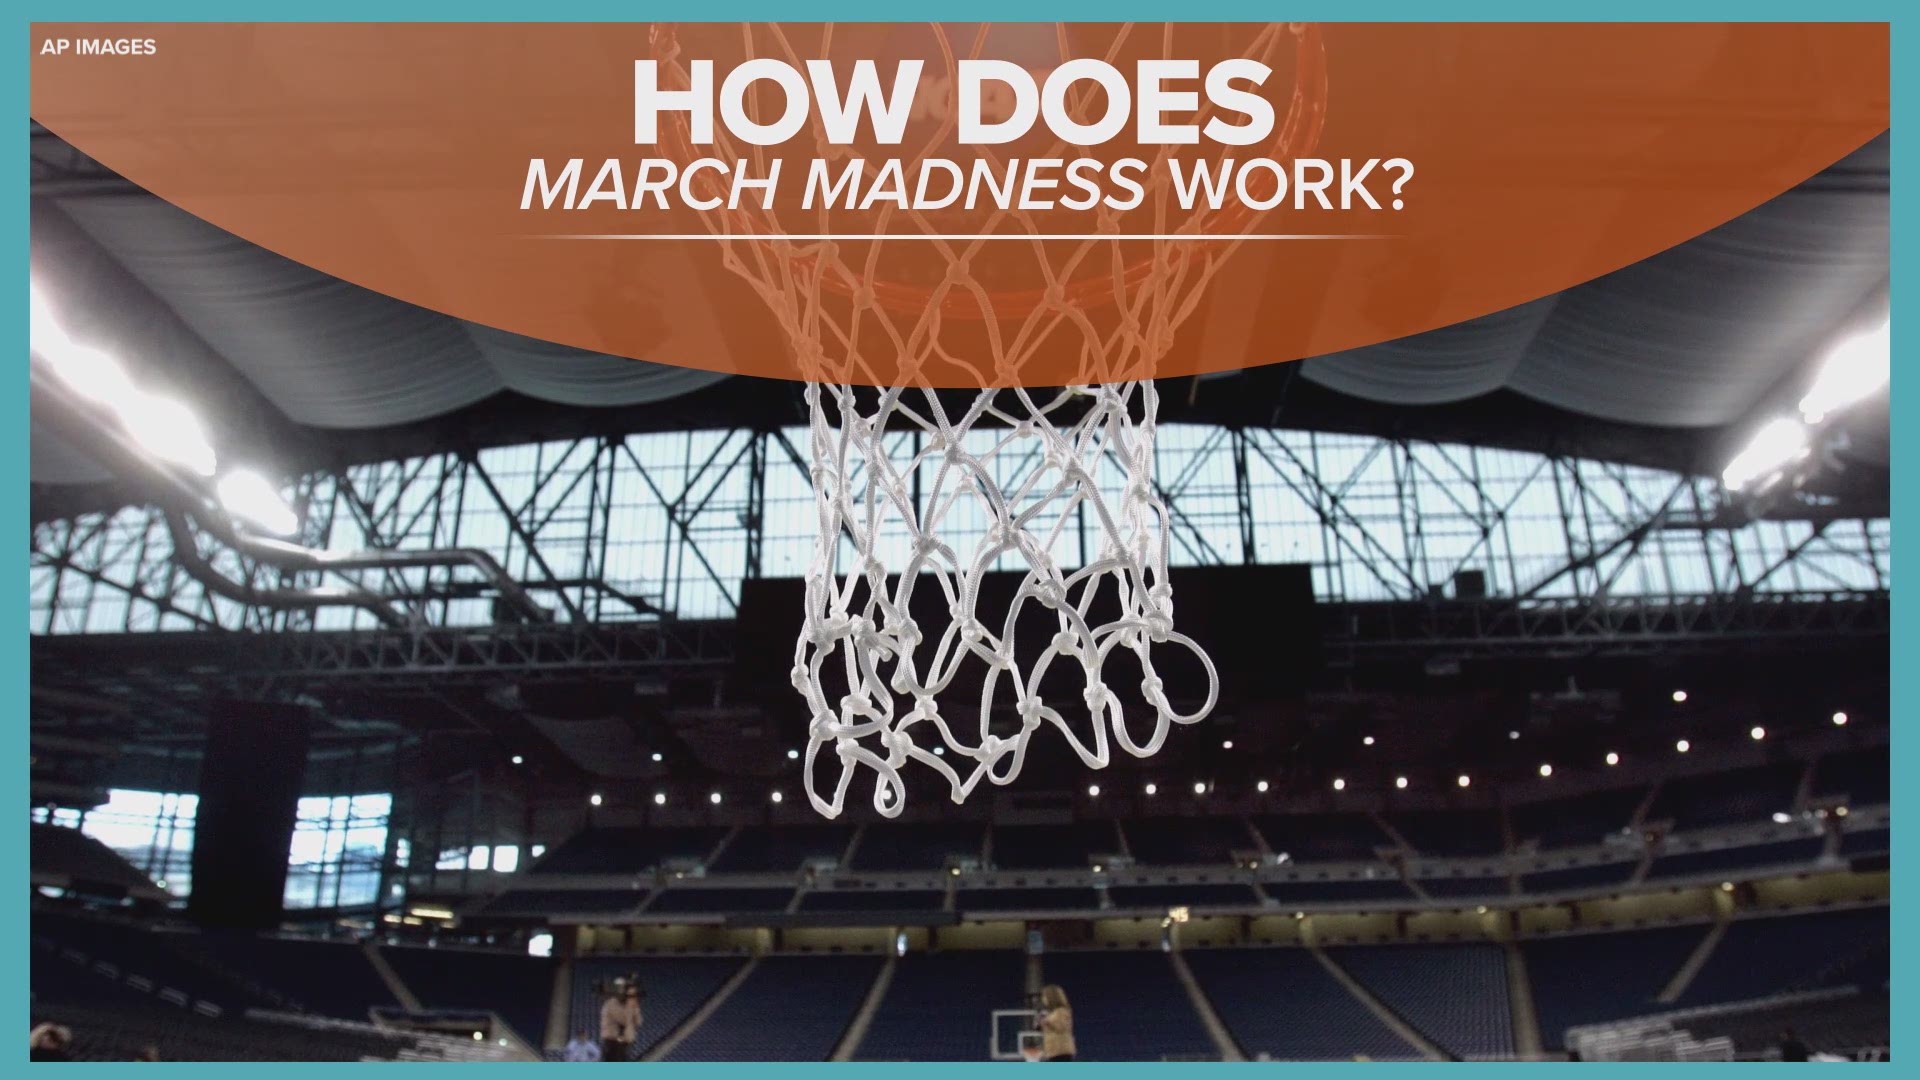 Here's what you need to know about March Madness 2021.